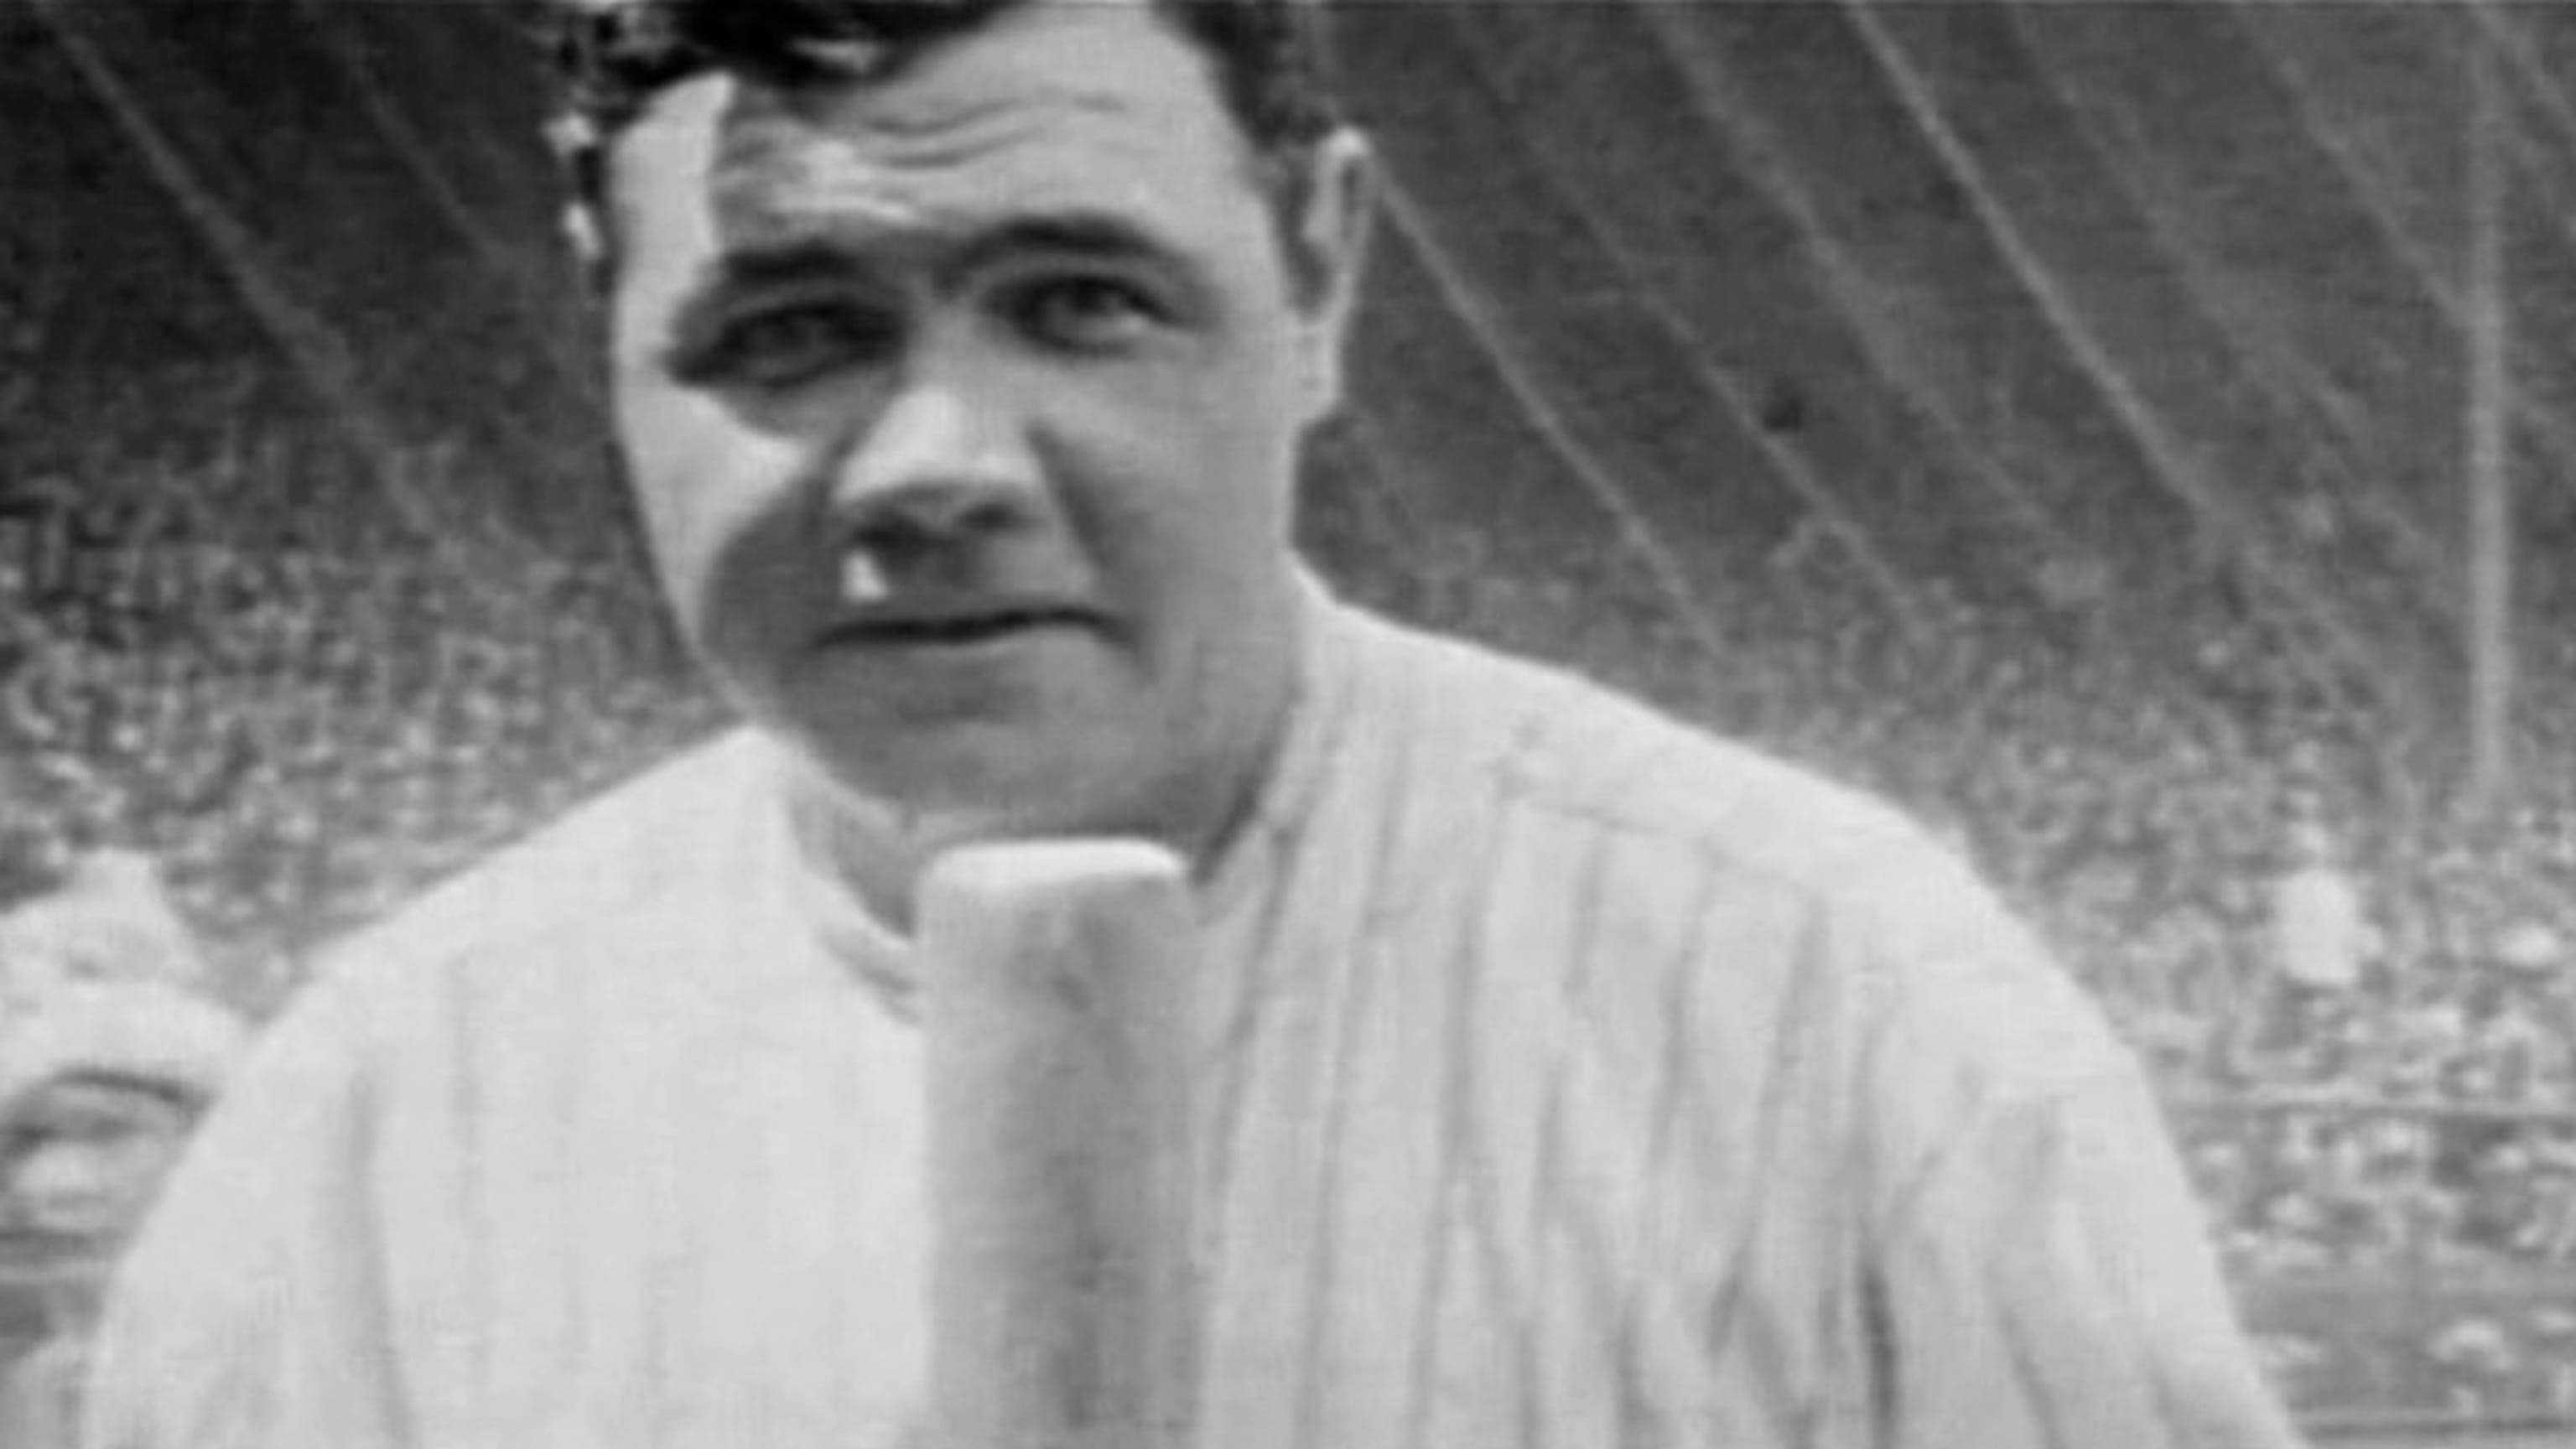 Babe Ruth ends career with Boston Braves